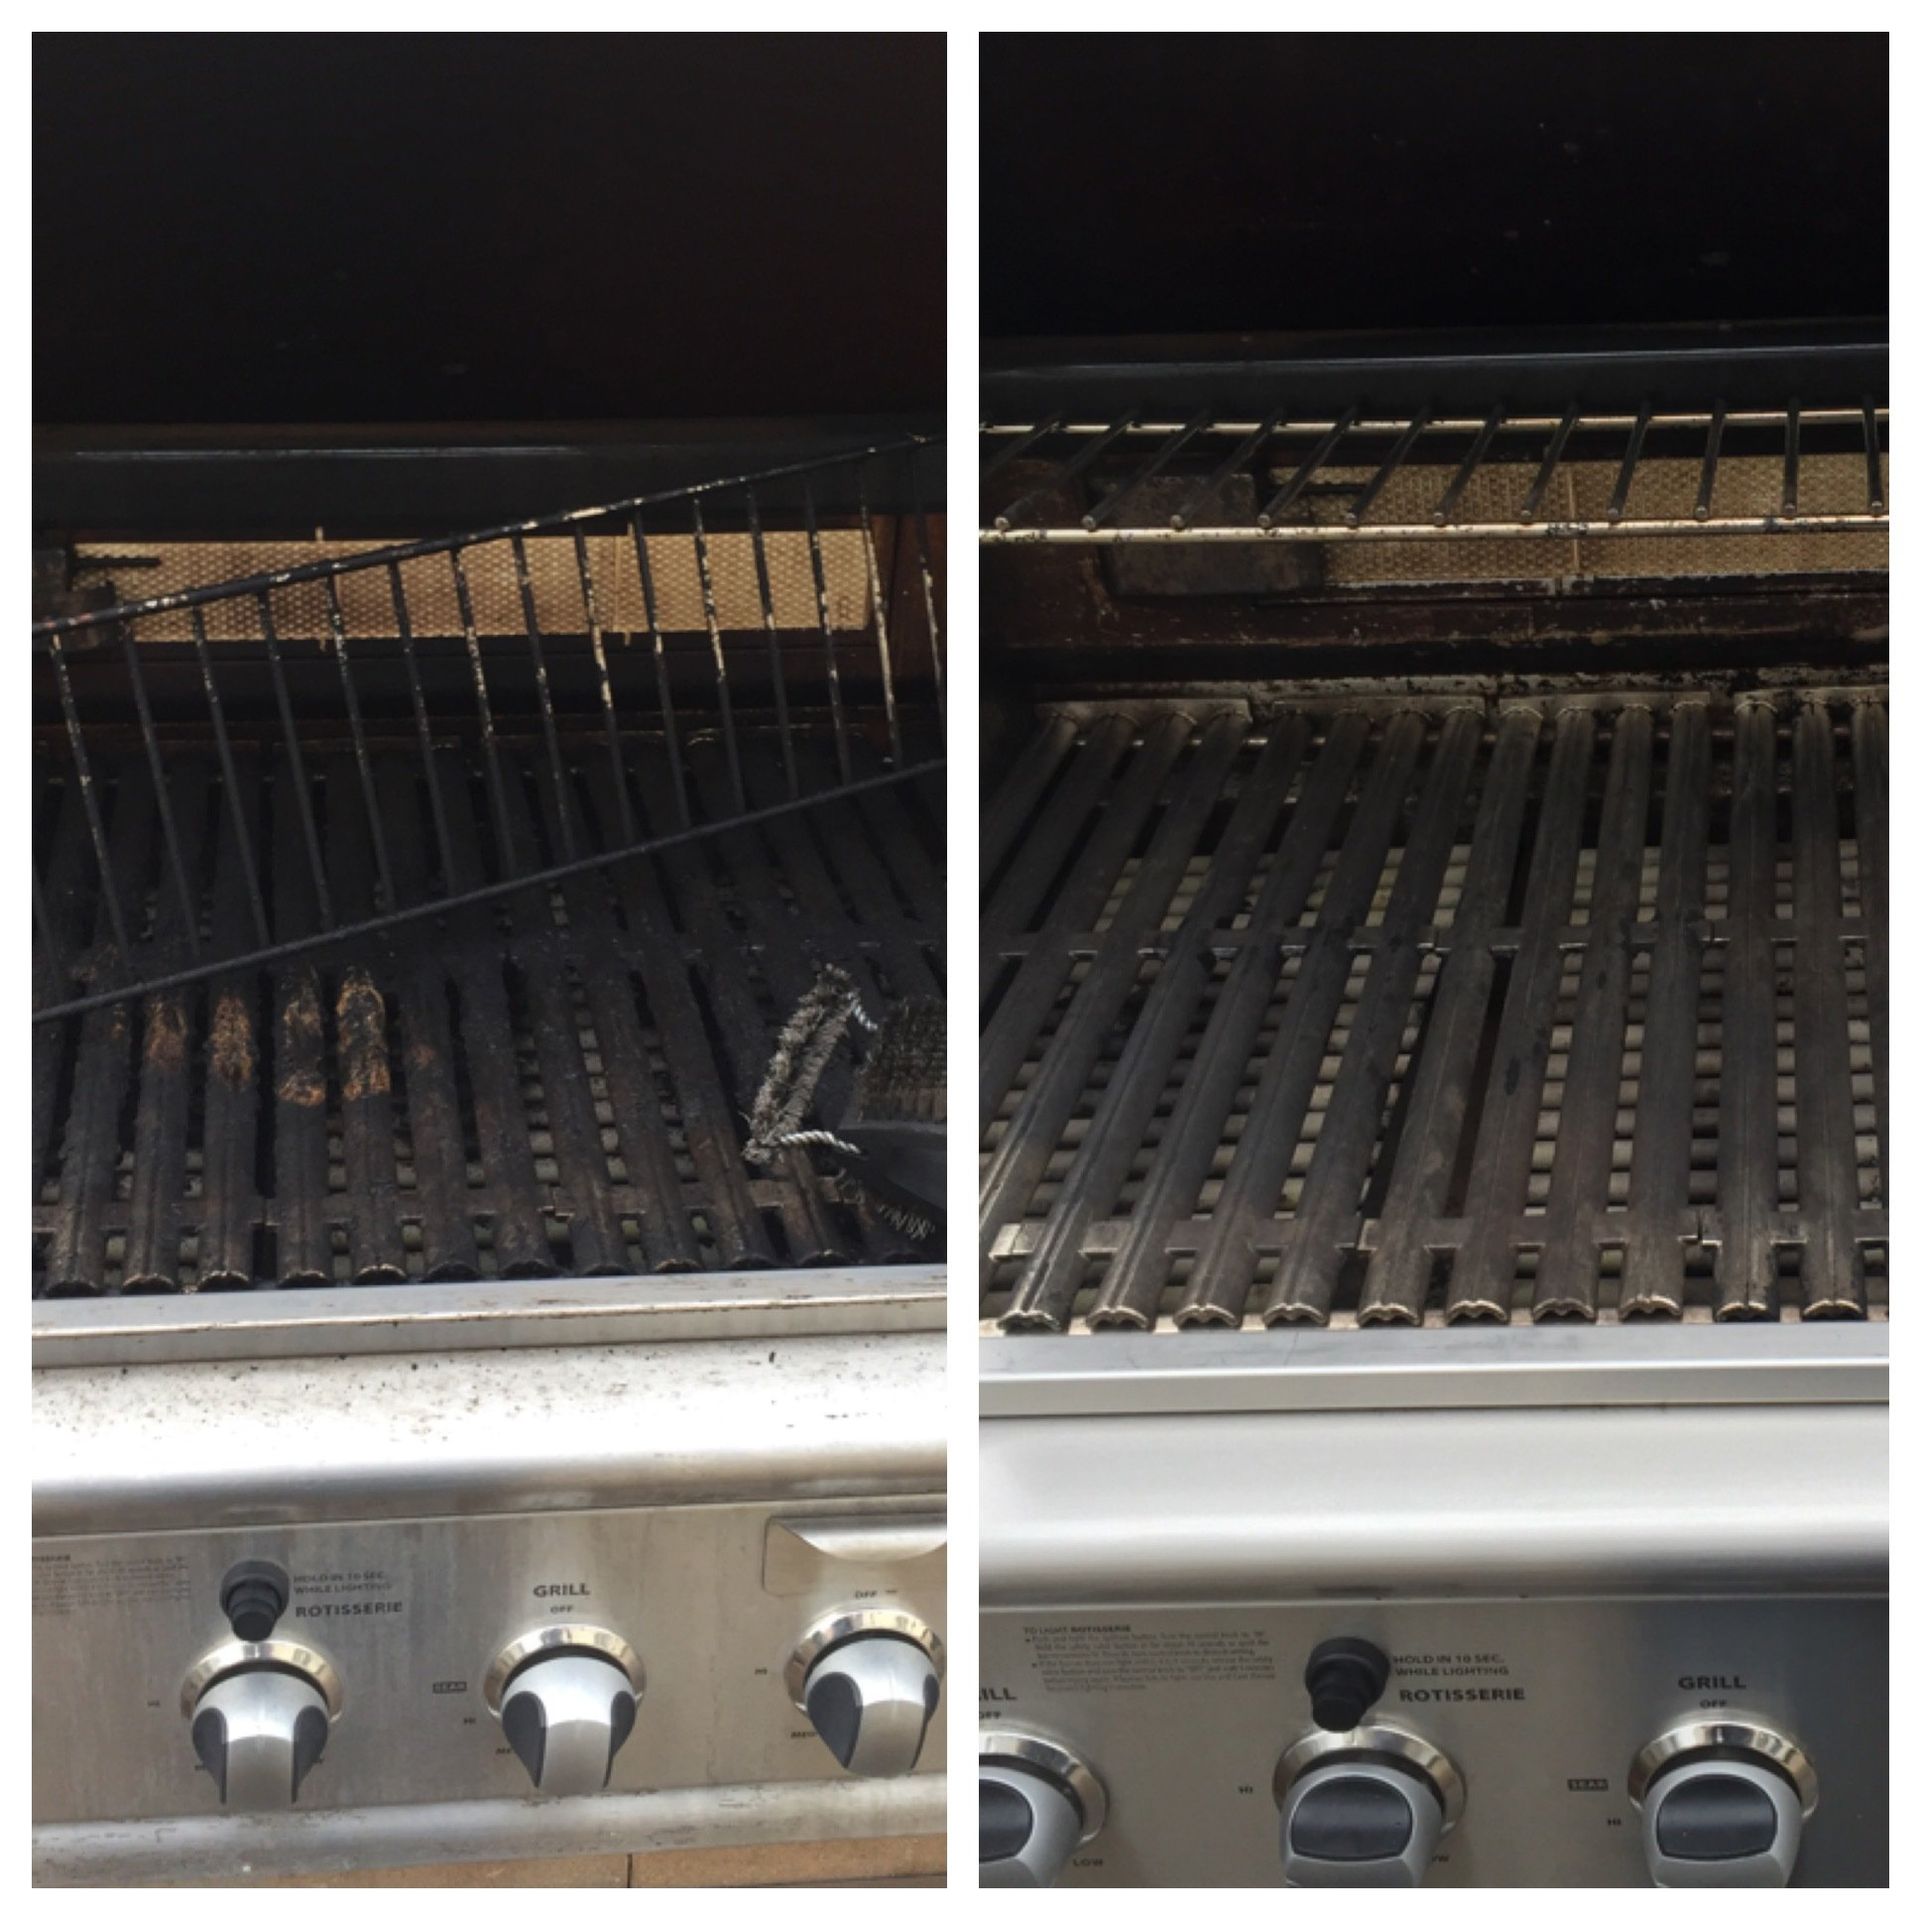 BBQ Grill Cleaning Suffolk County, NY